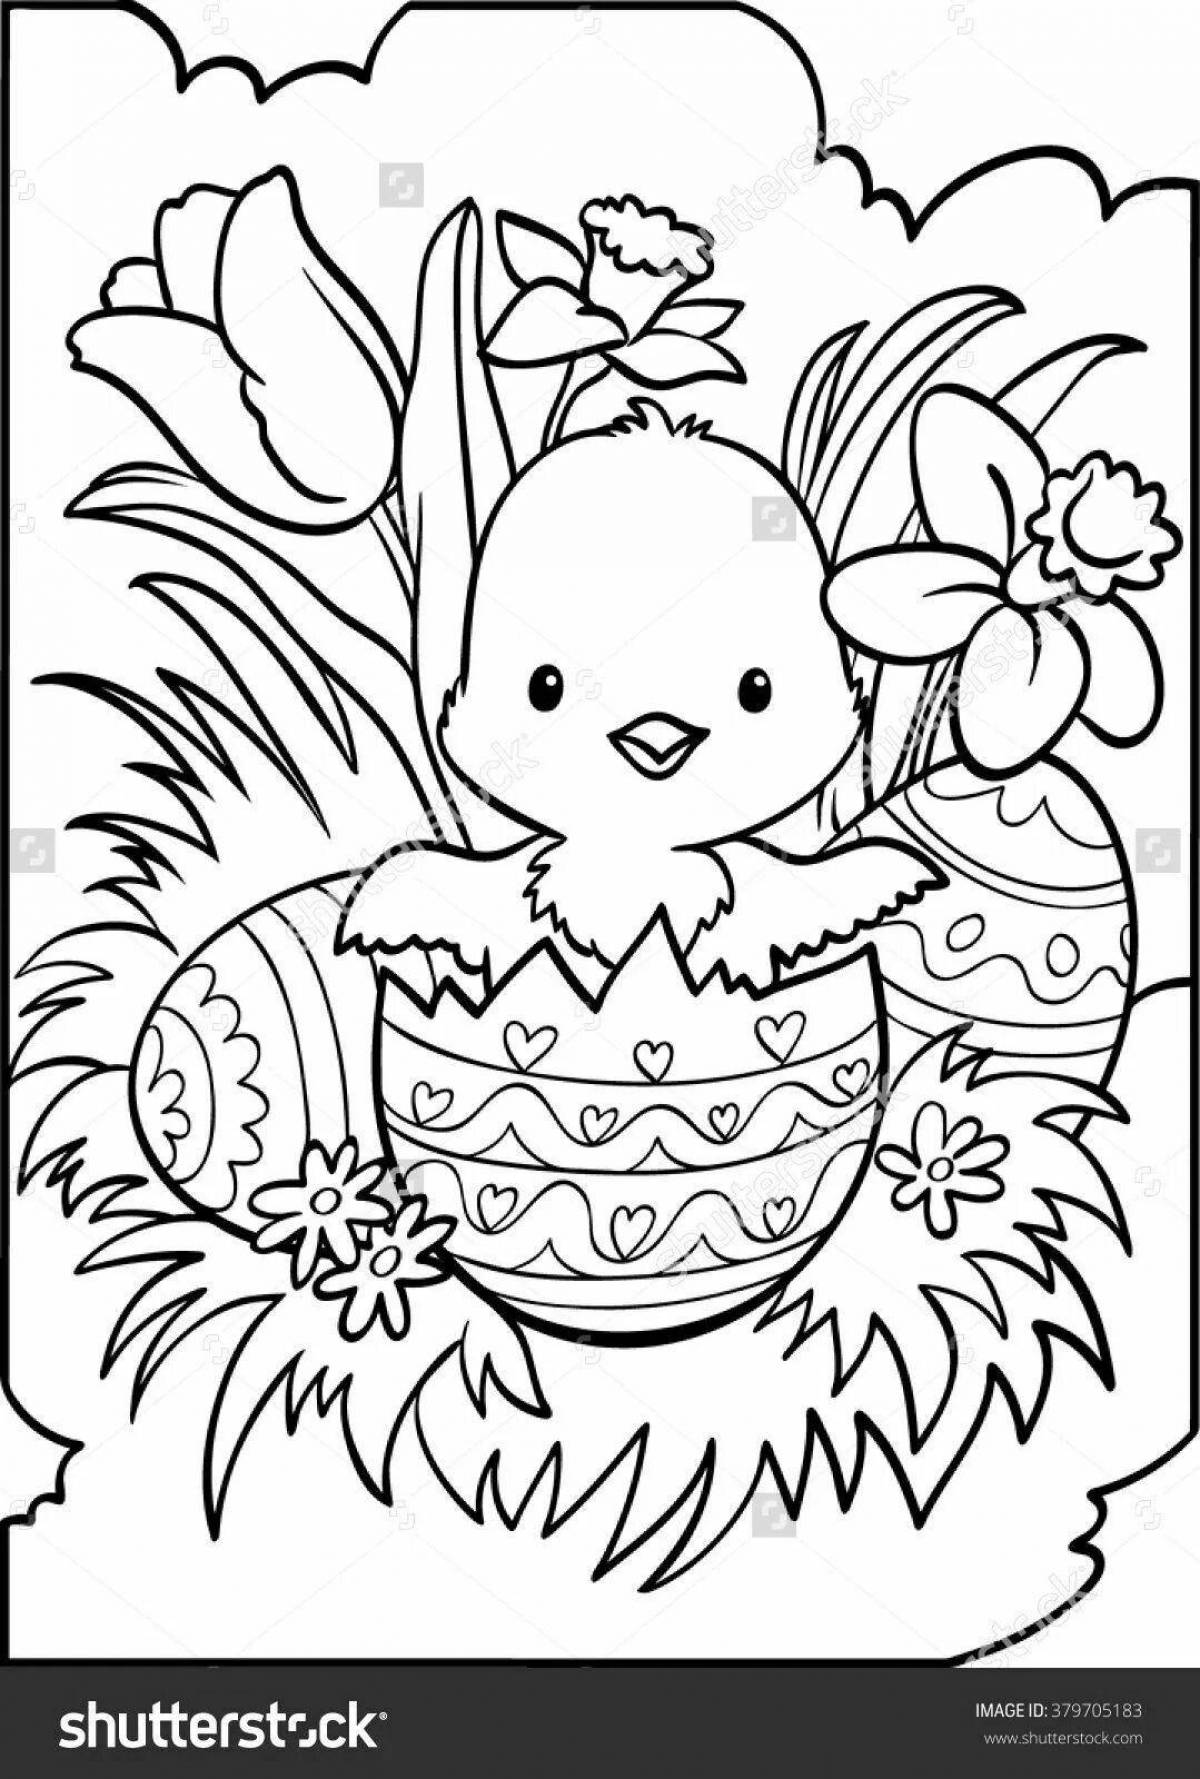 Coloring page humorous chick in egg